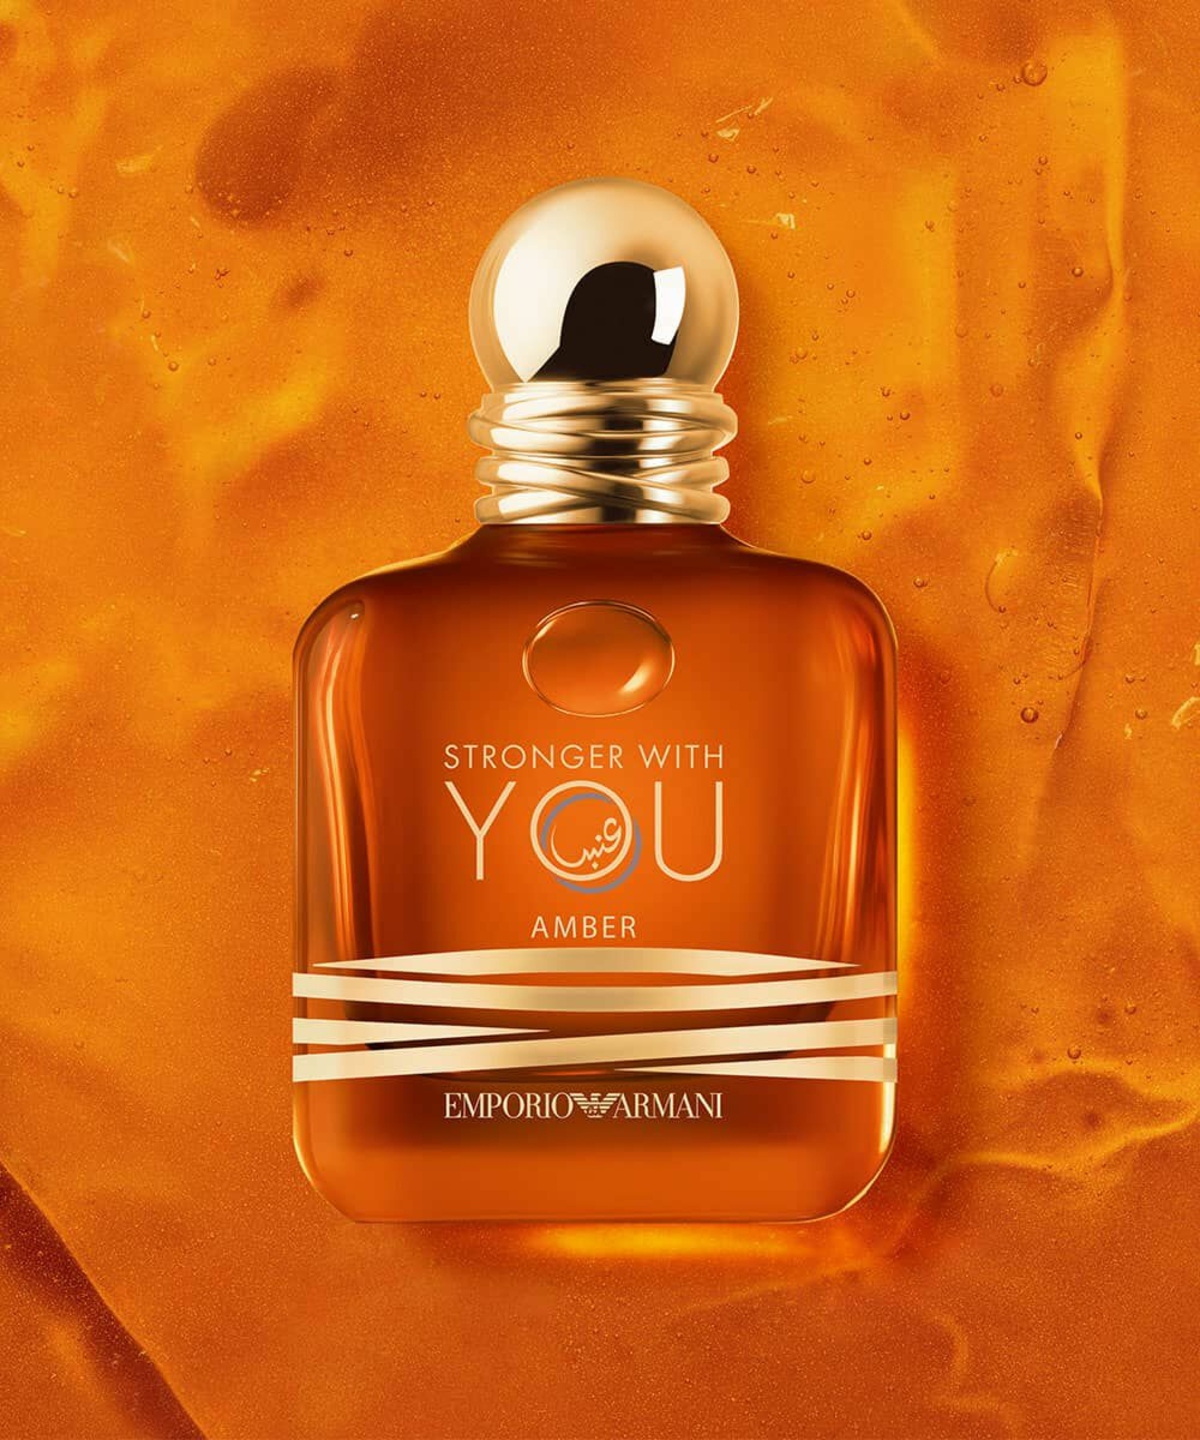 Emporio Armani - Stronger With You Amber